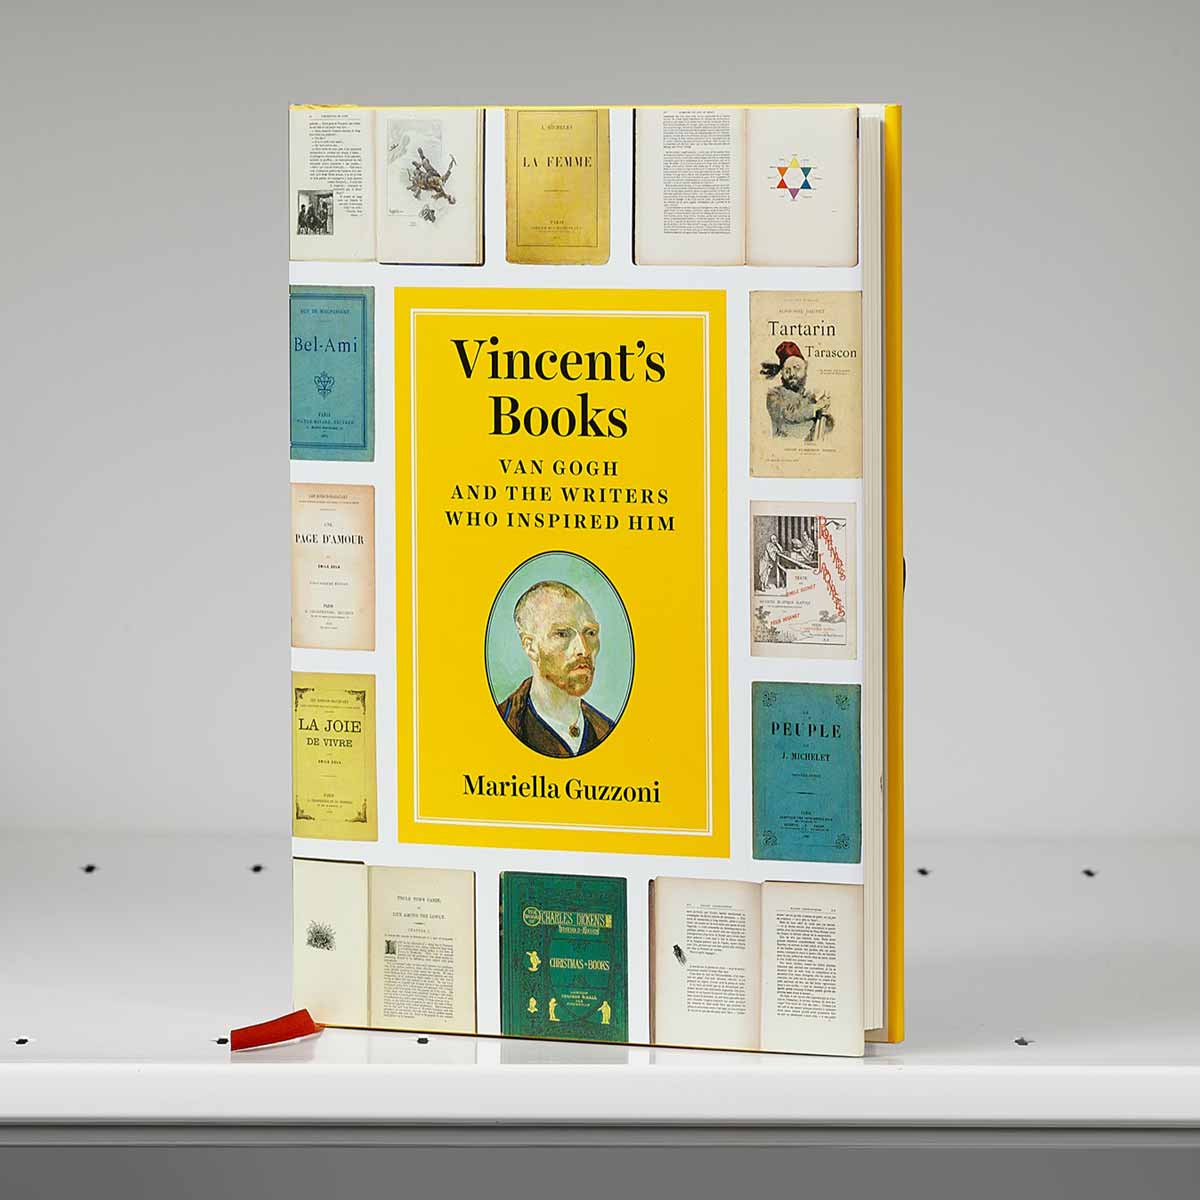 Book cover with portrait of Vincent van Gogh surrounded by books